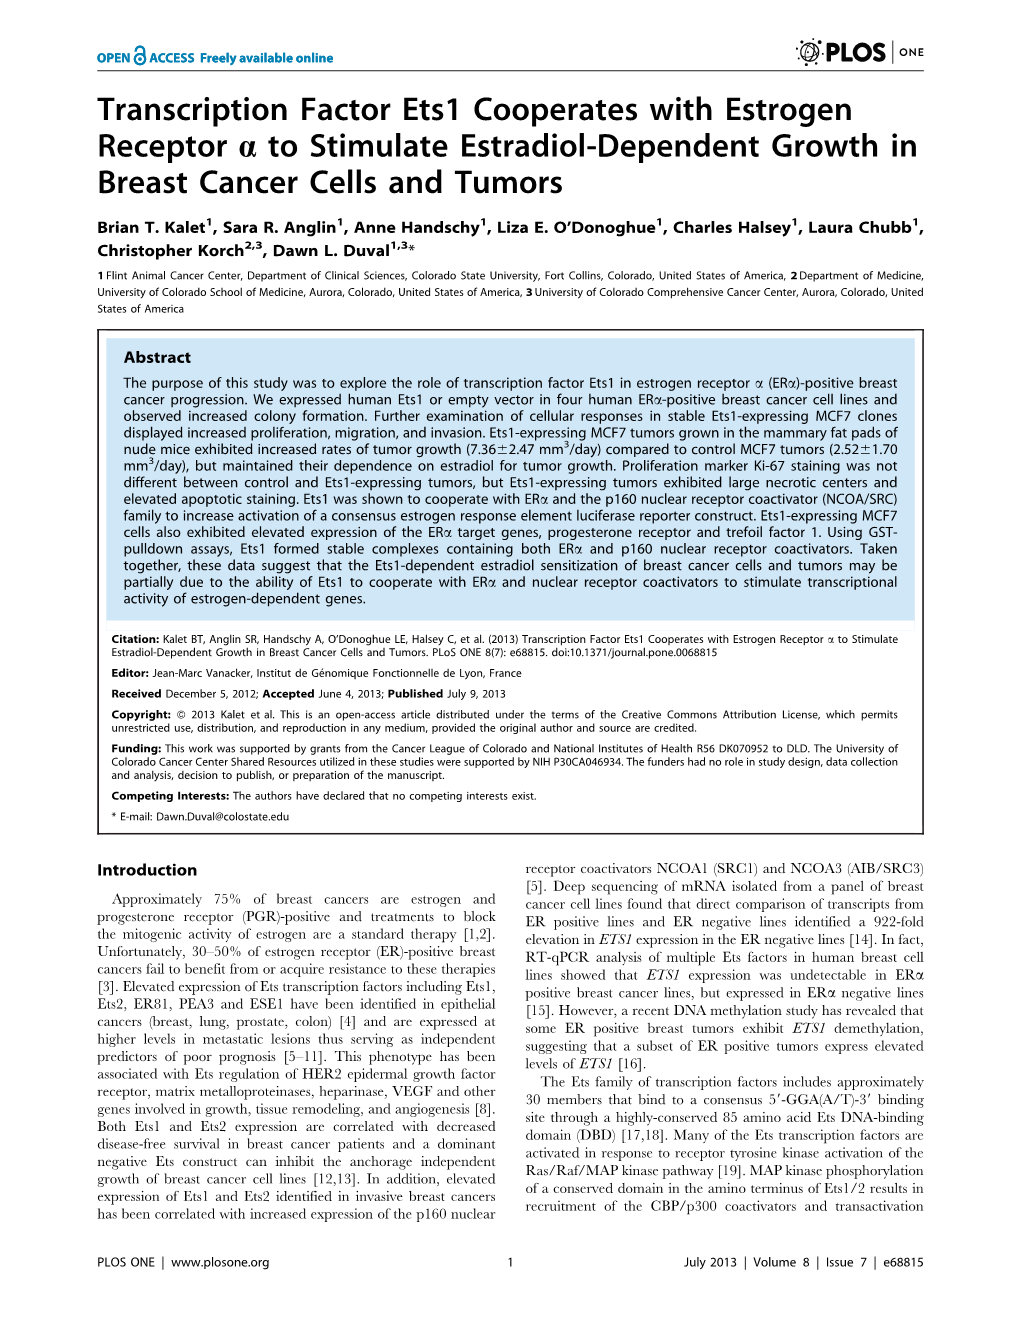 Transcription Factor Ets1 Cooperates with Estrogen Receptor a to Stimulate Estradiol-Dependent Growth in Breast Cancer Cells and Tumors